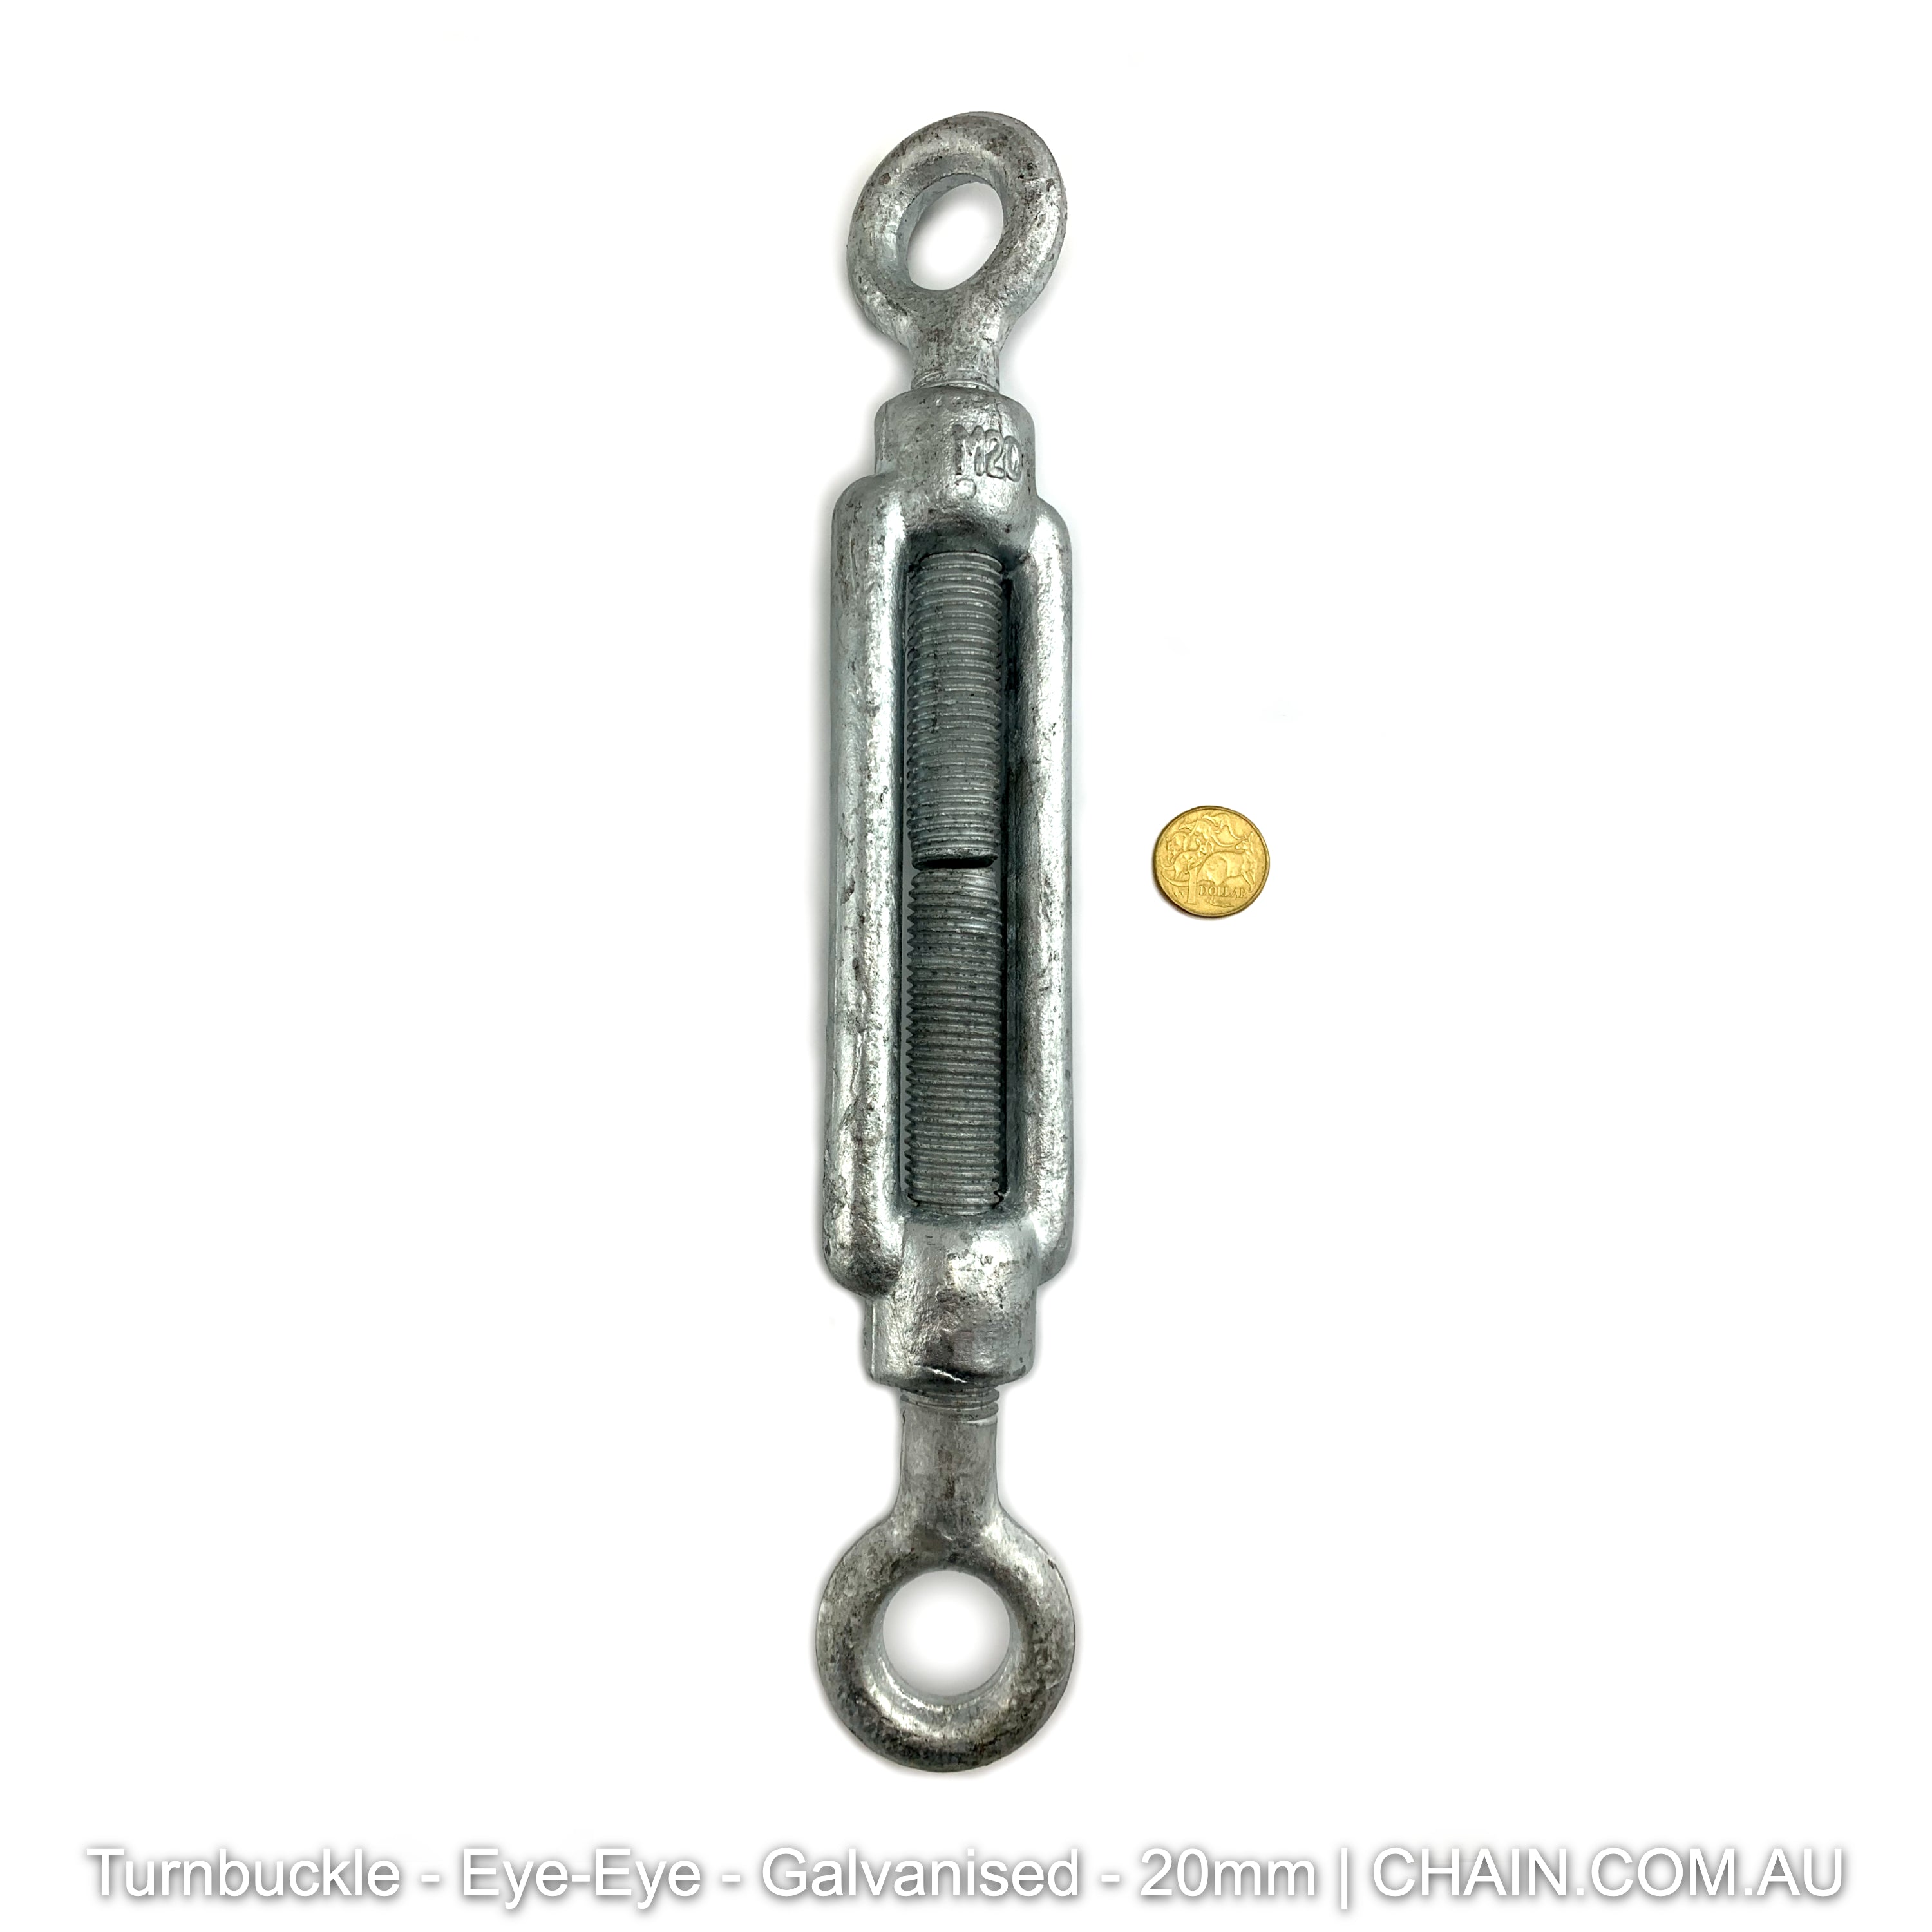 20mm Eye-Eye Turnbuckle Galvanised. Shop hardware online chain.com.au. Australia wide delivery & Melbourne click & collect.